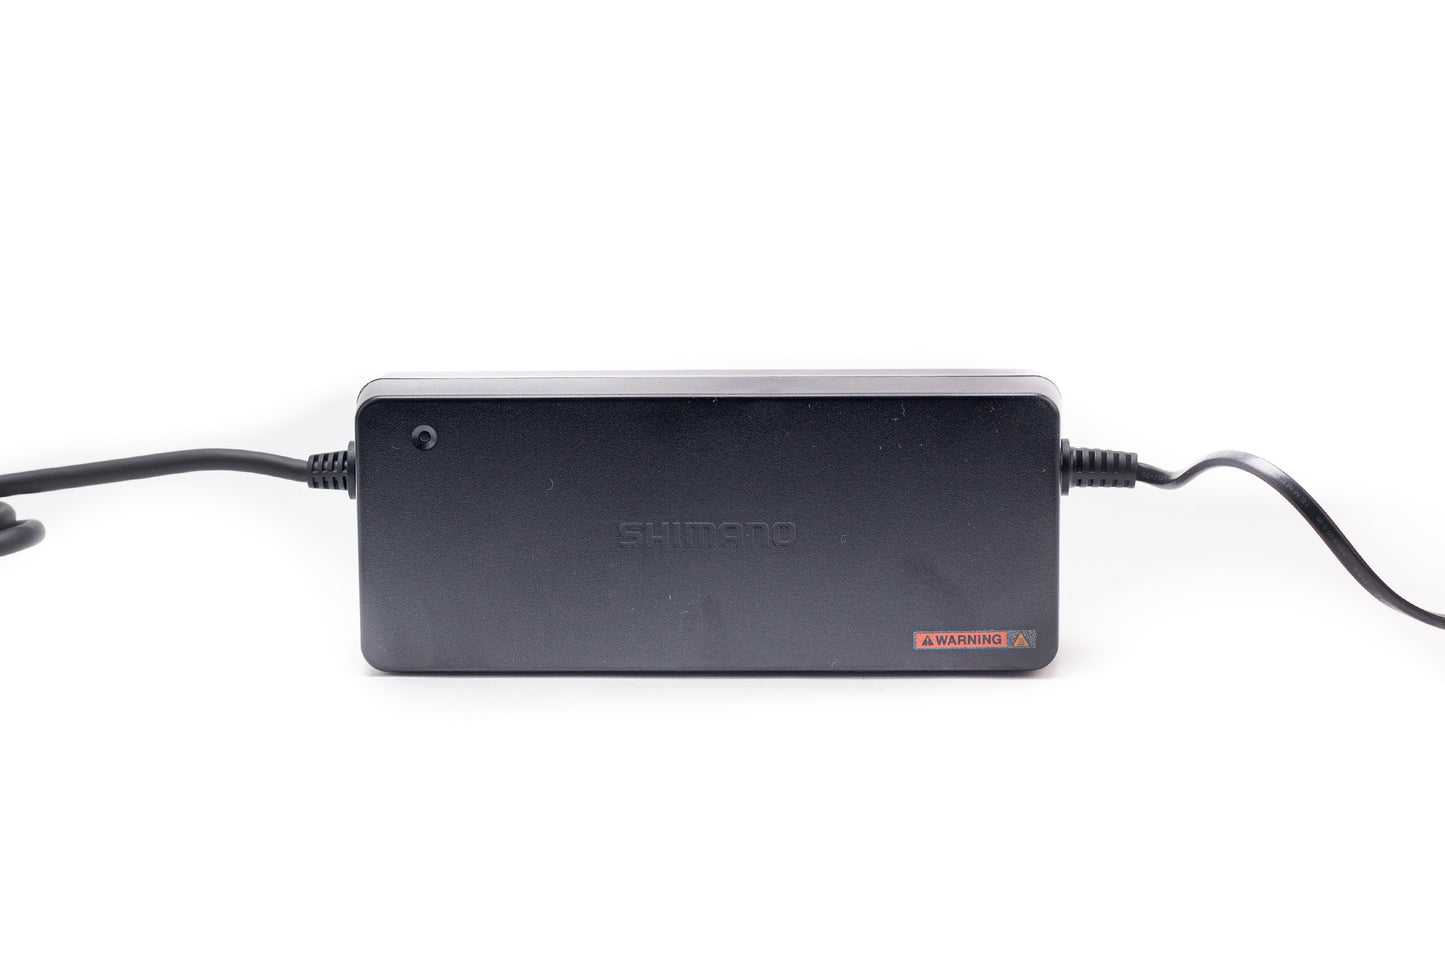 Shimano Battery Charger EC-E6000 for UK Outlet